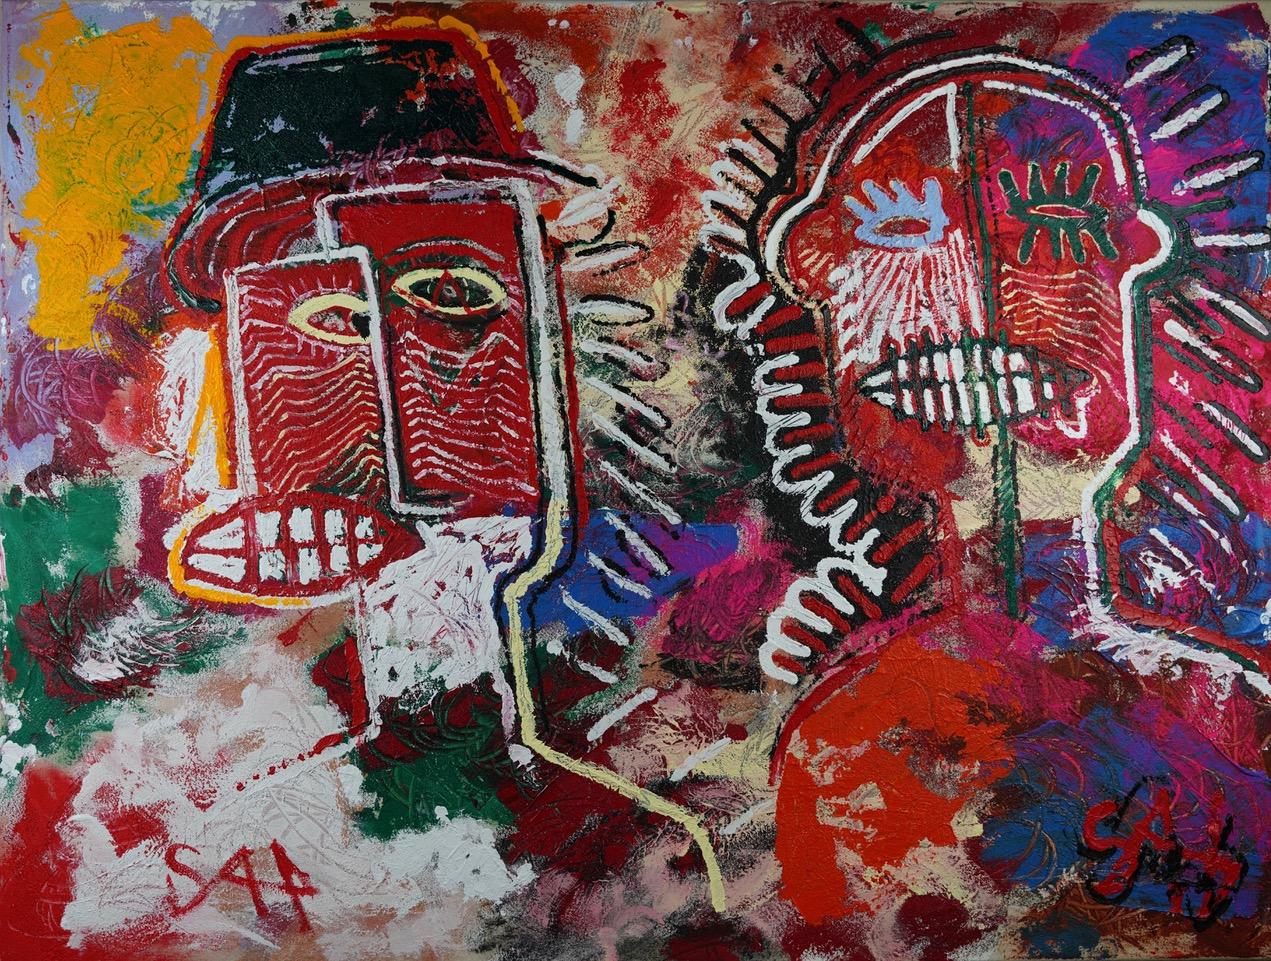 Sax Berlin Abstract Painting - Neo Expressionism Renaissance. Volume 1